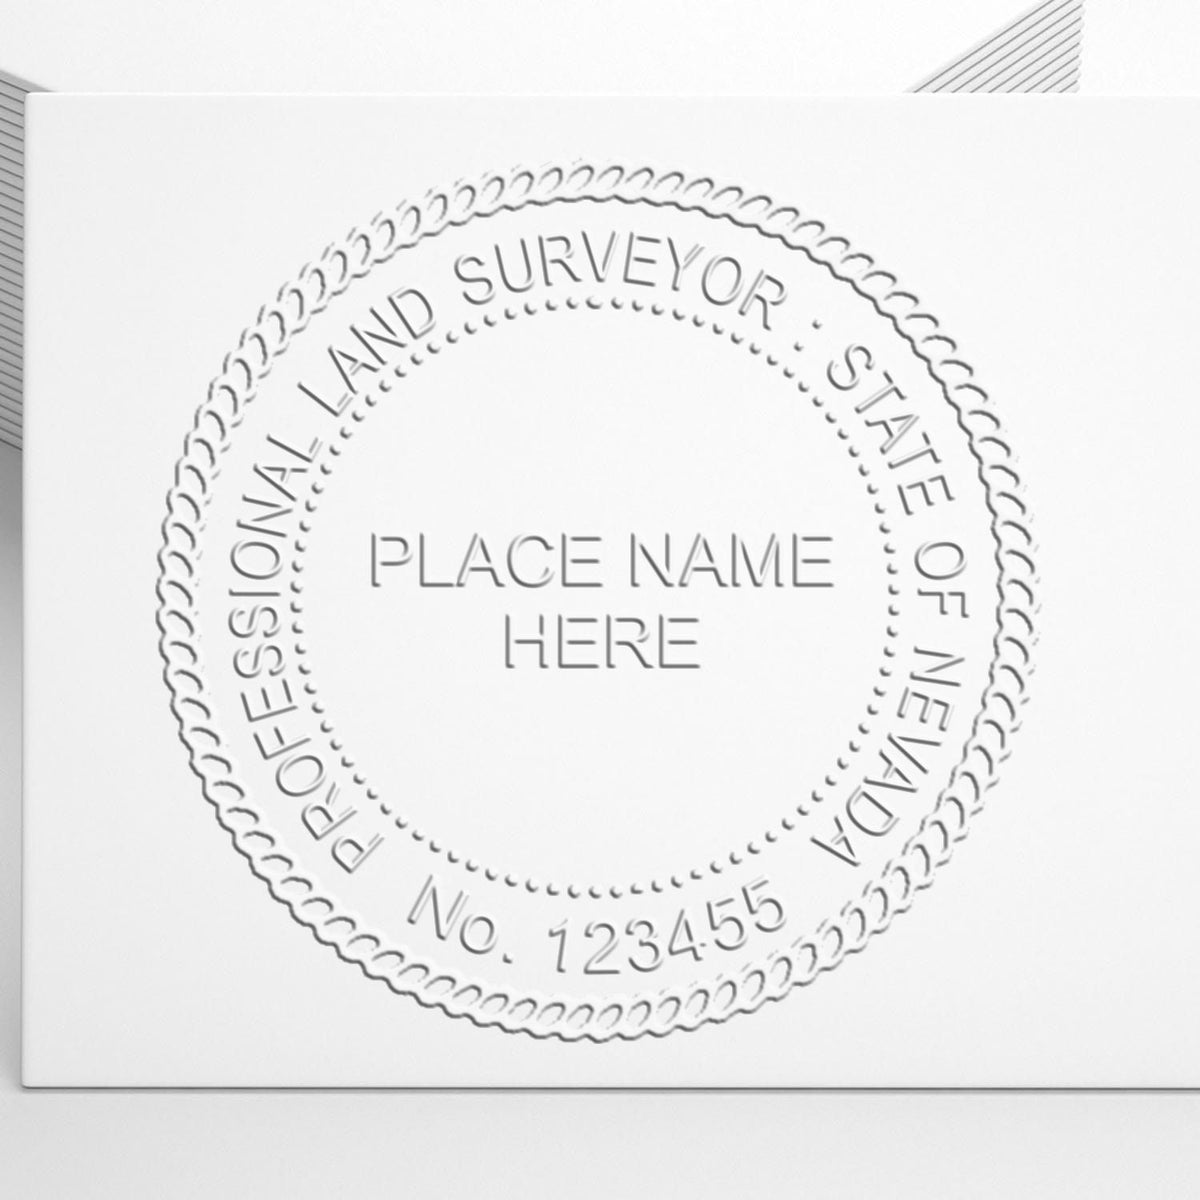 A stamped imprint of the Gift Nevada Land Surveyor Seal in this stylish lifestyle photo, setting the tone for a unique and personalized product.